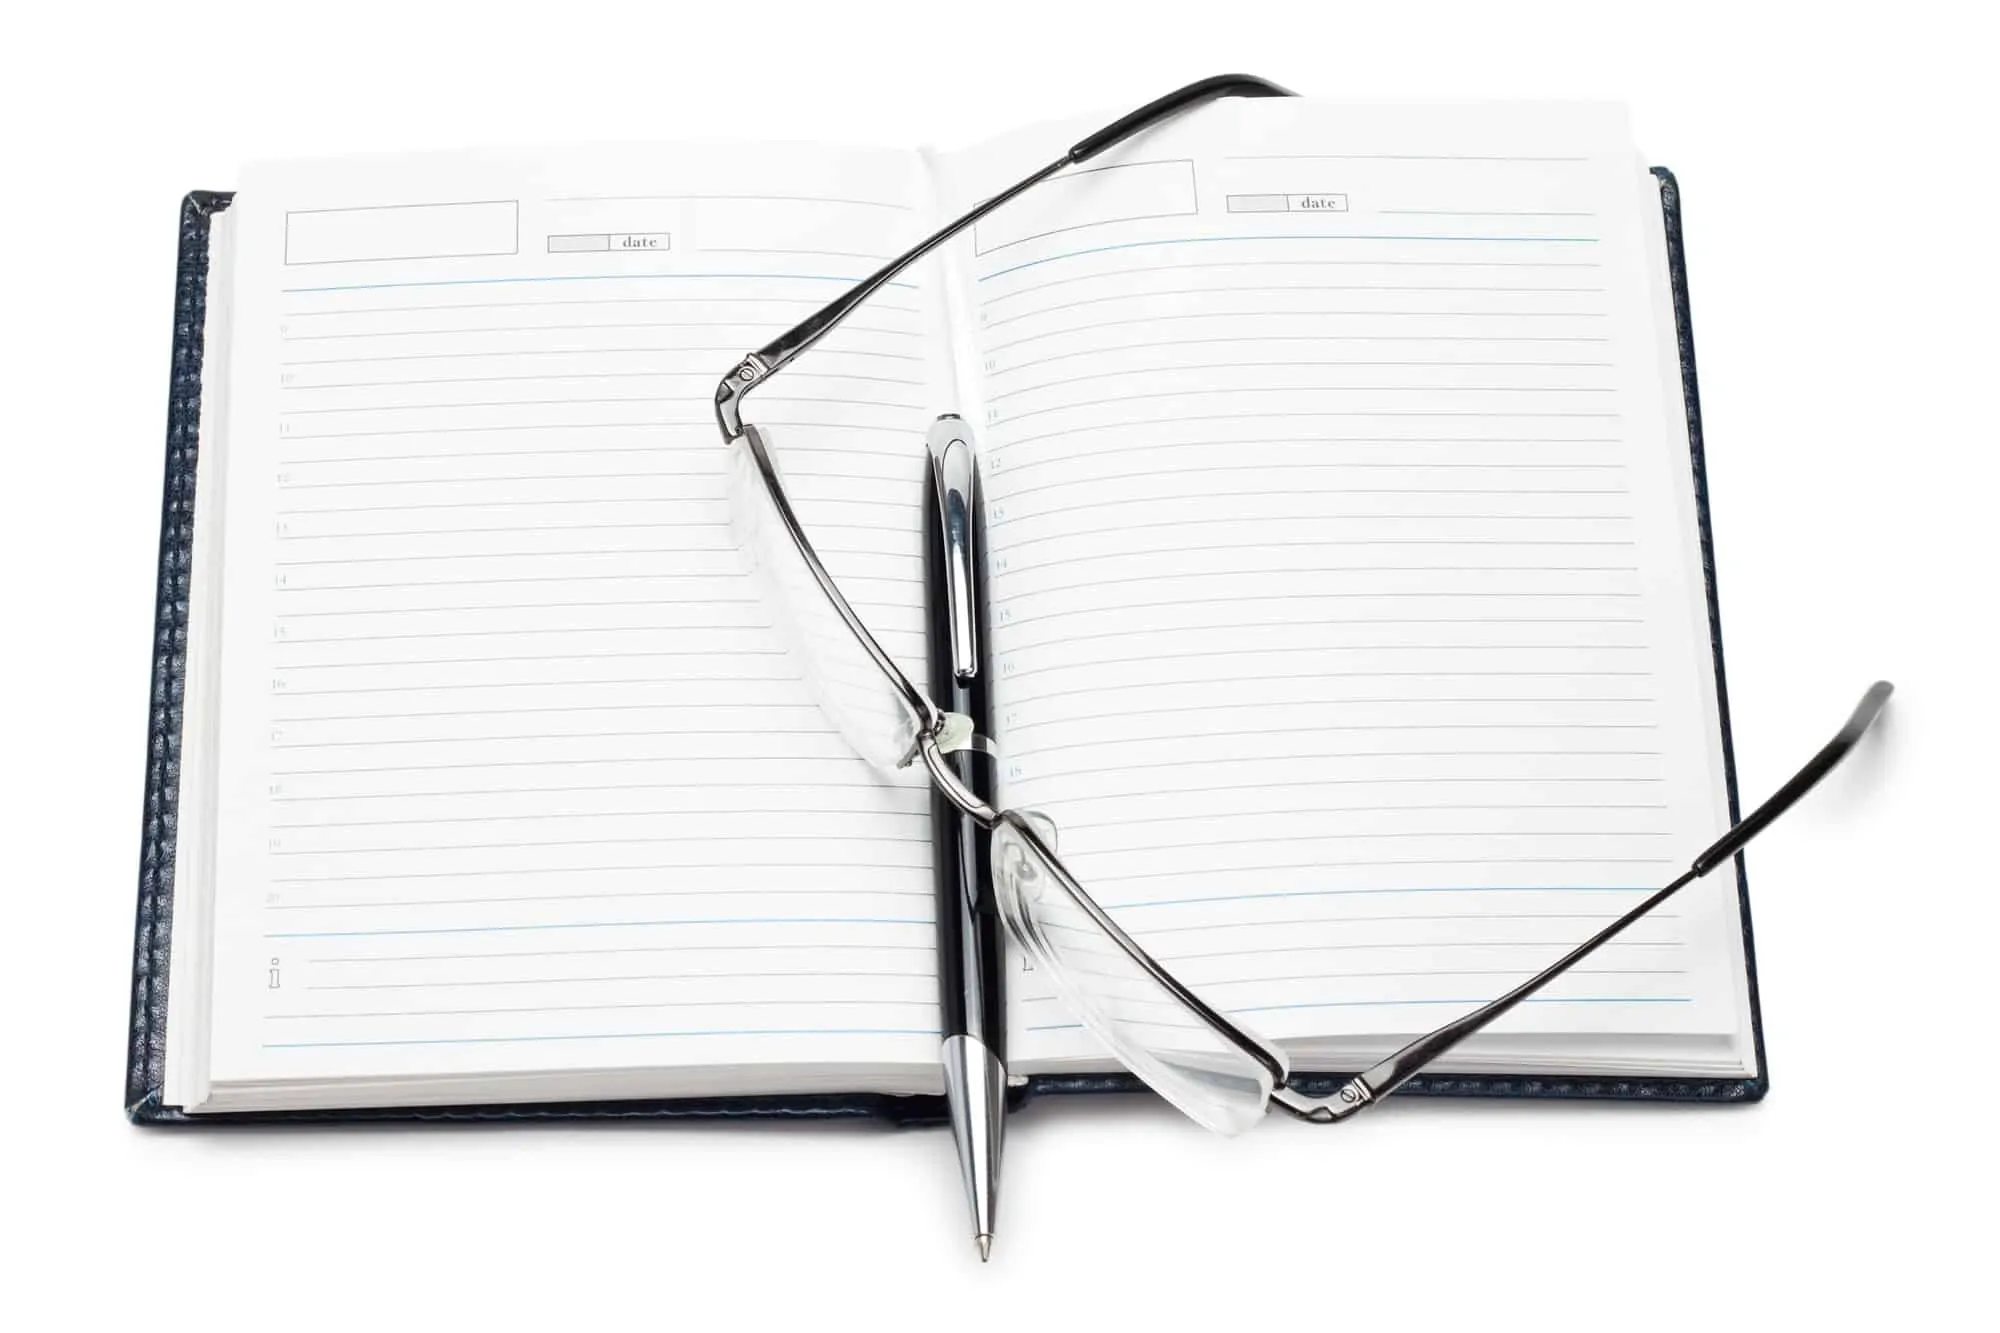 Opened Notebook With Pen And Glasses Isolated